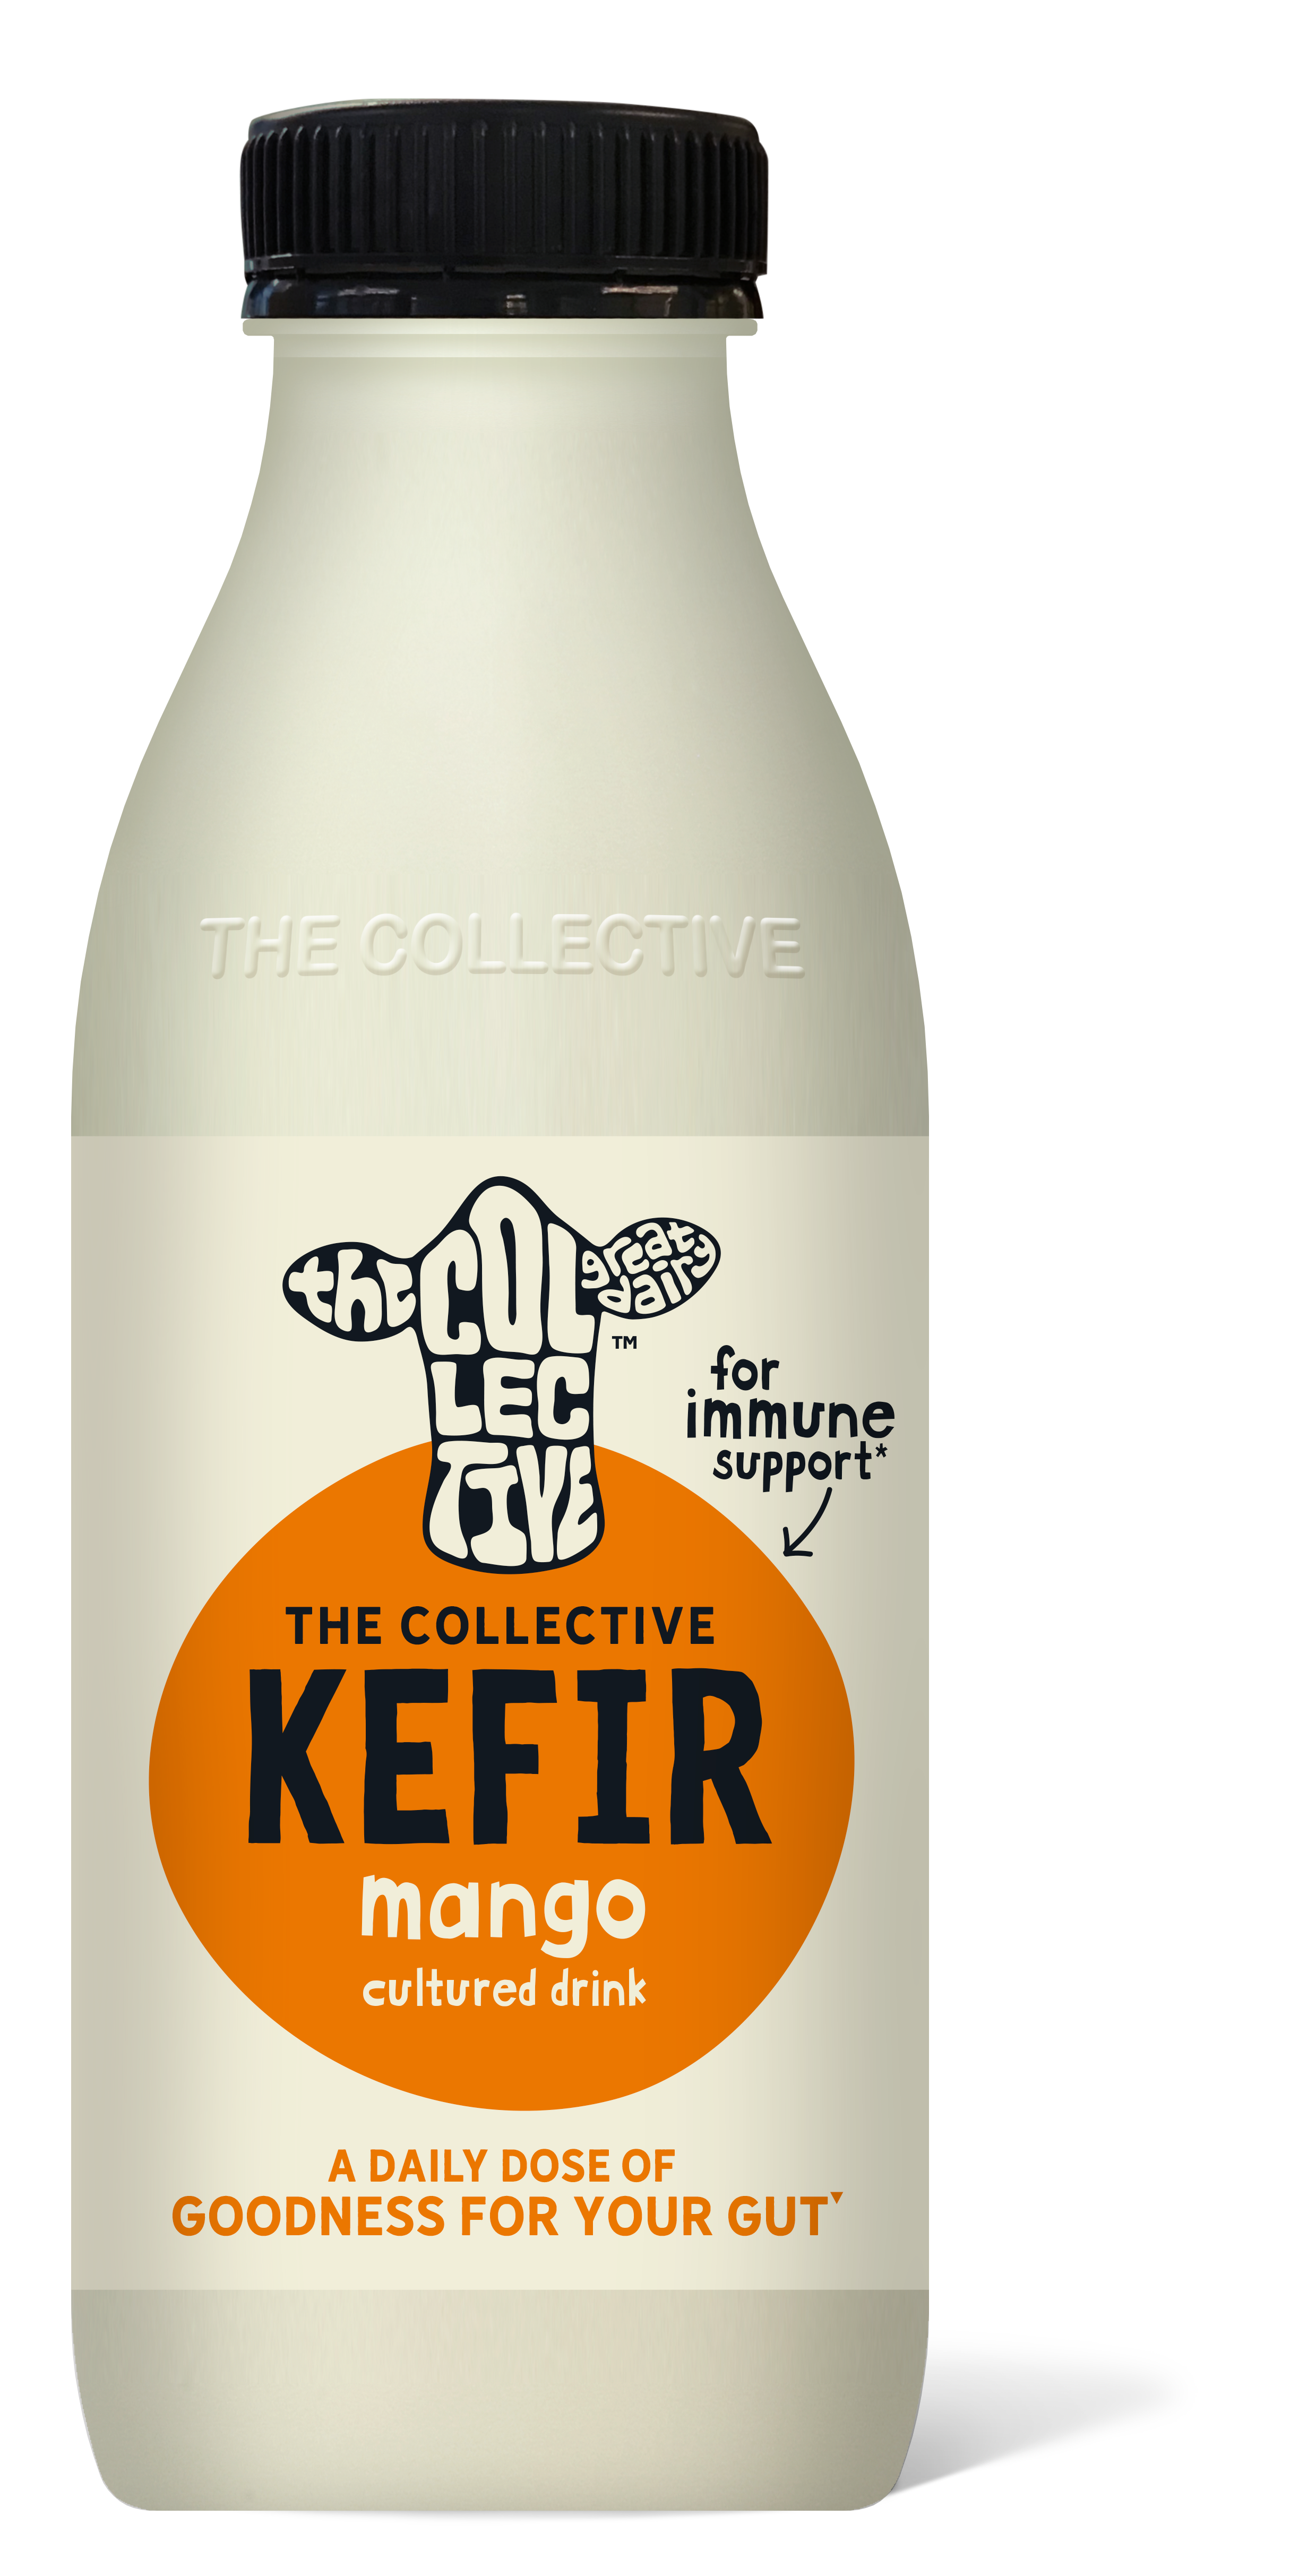 Mango and Turmeric Kefir 500ml | The Collective, great dairy...no bull